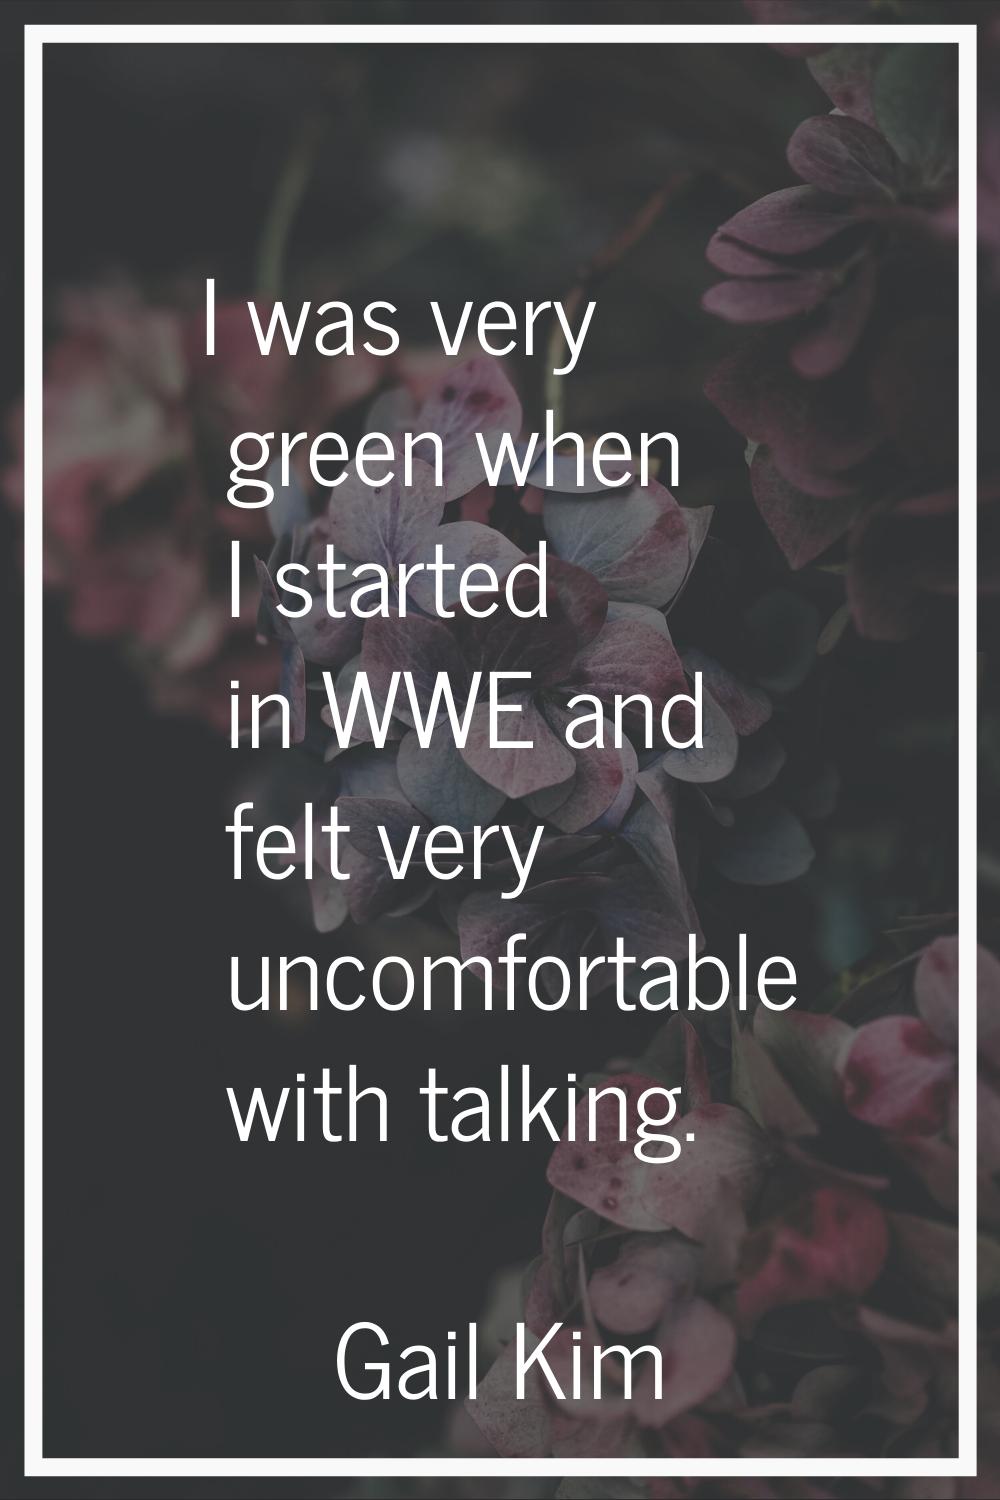 I was very green when I started in WWE and felt very uncomfortable with talking.